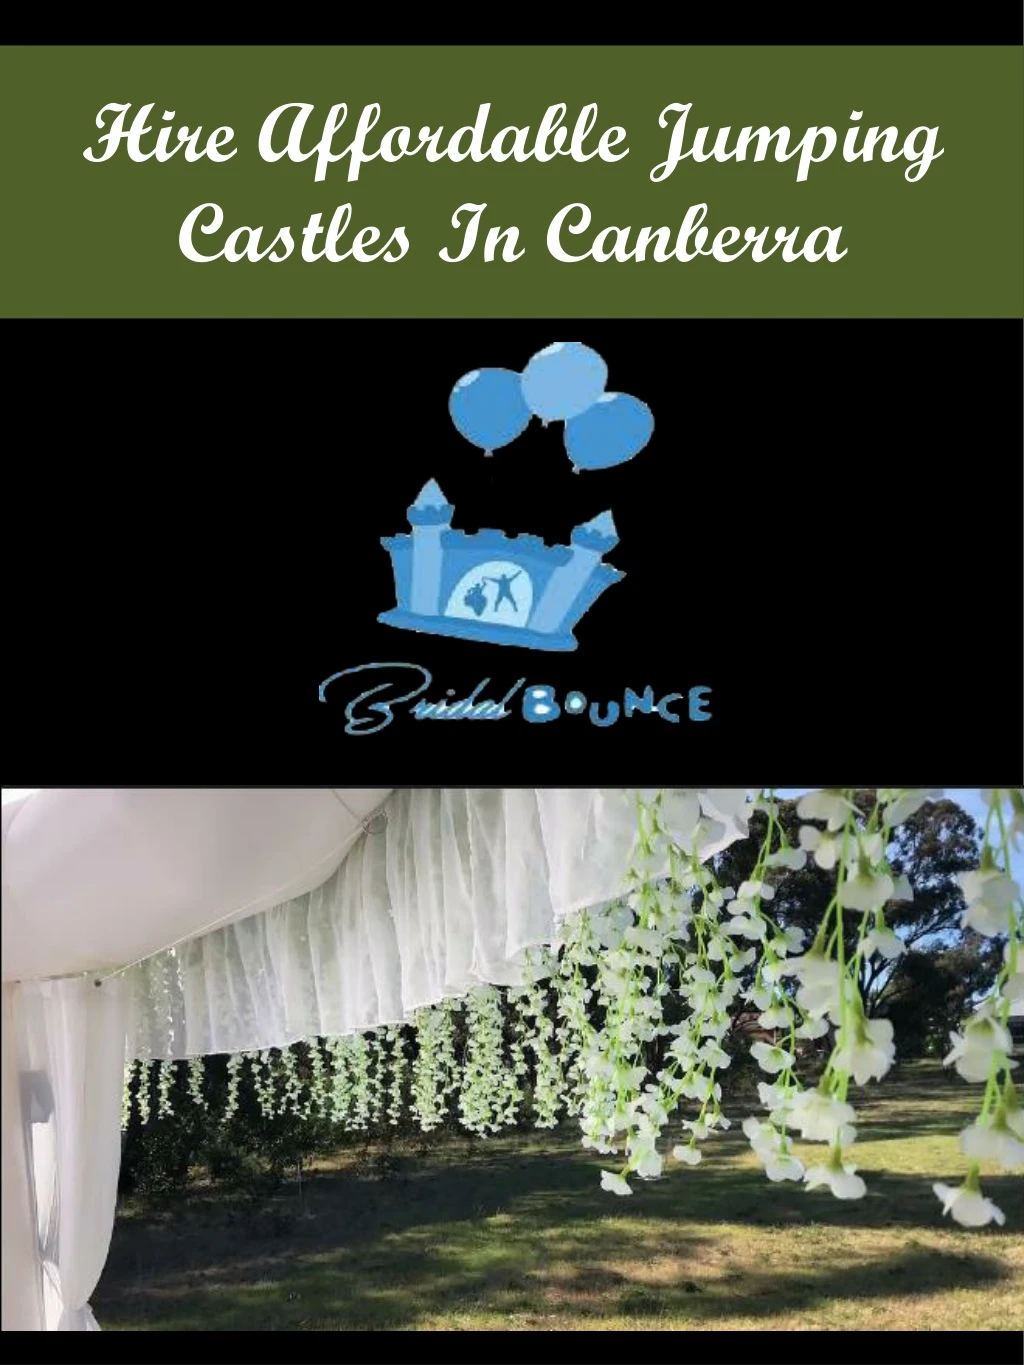 hire affordable jumping castles in canberra